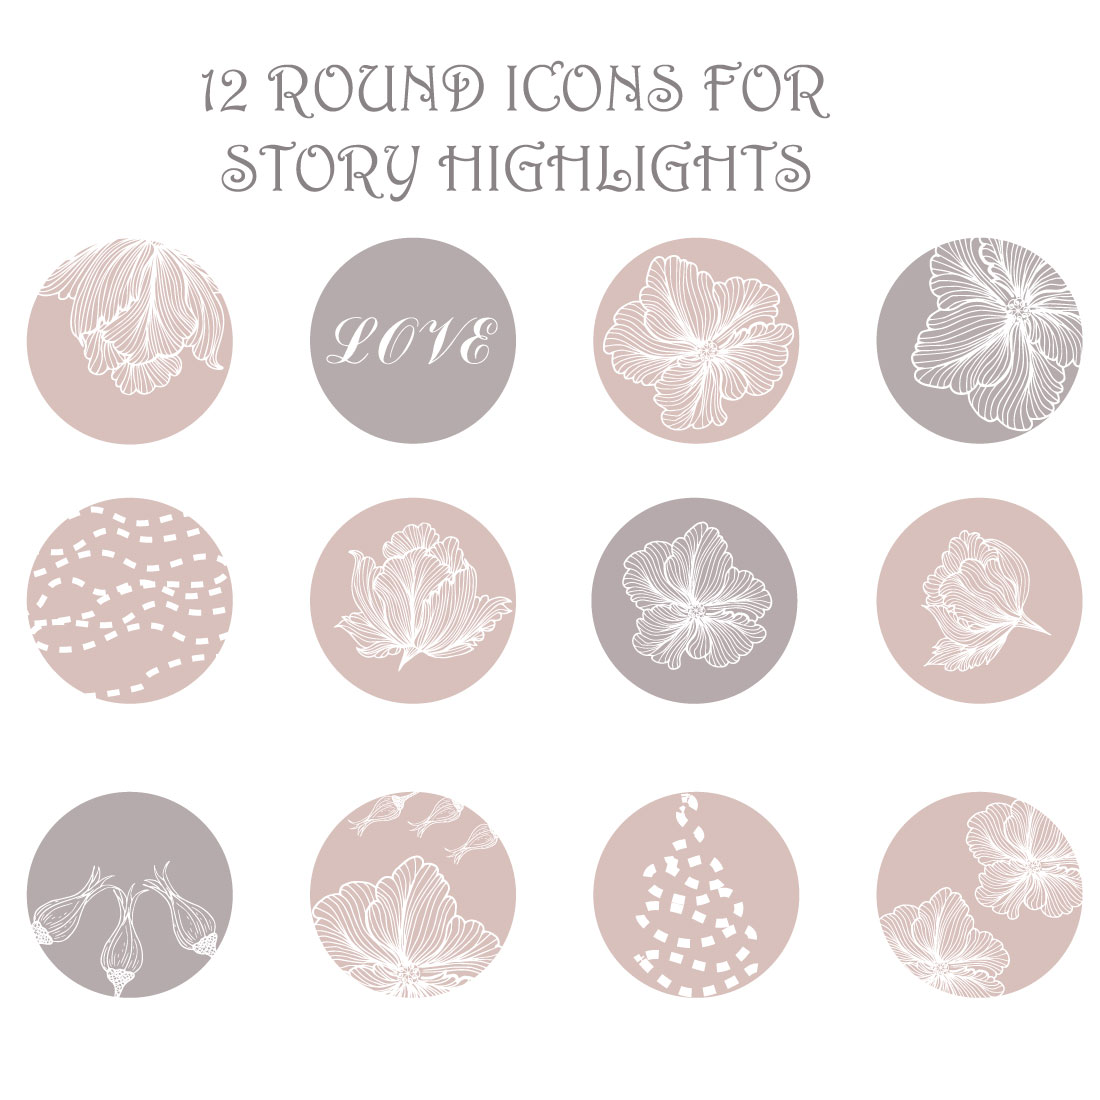 Perfect pastel icons for your highlights.